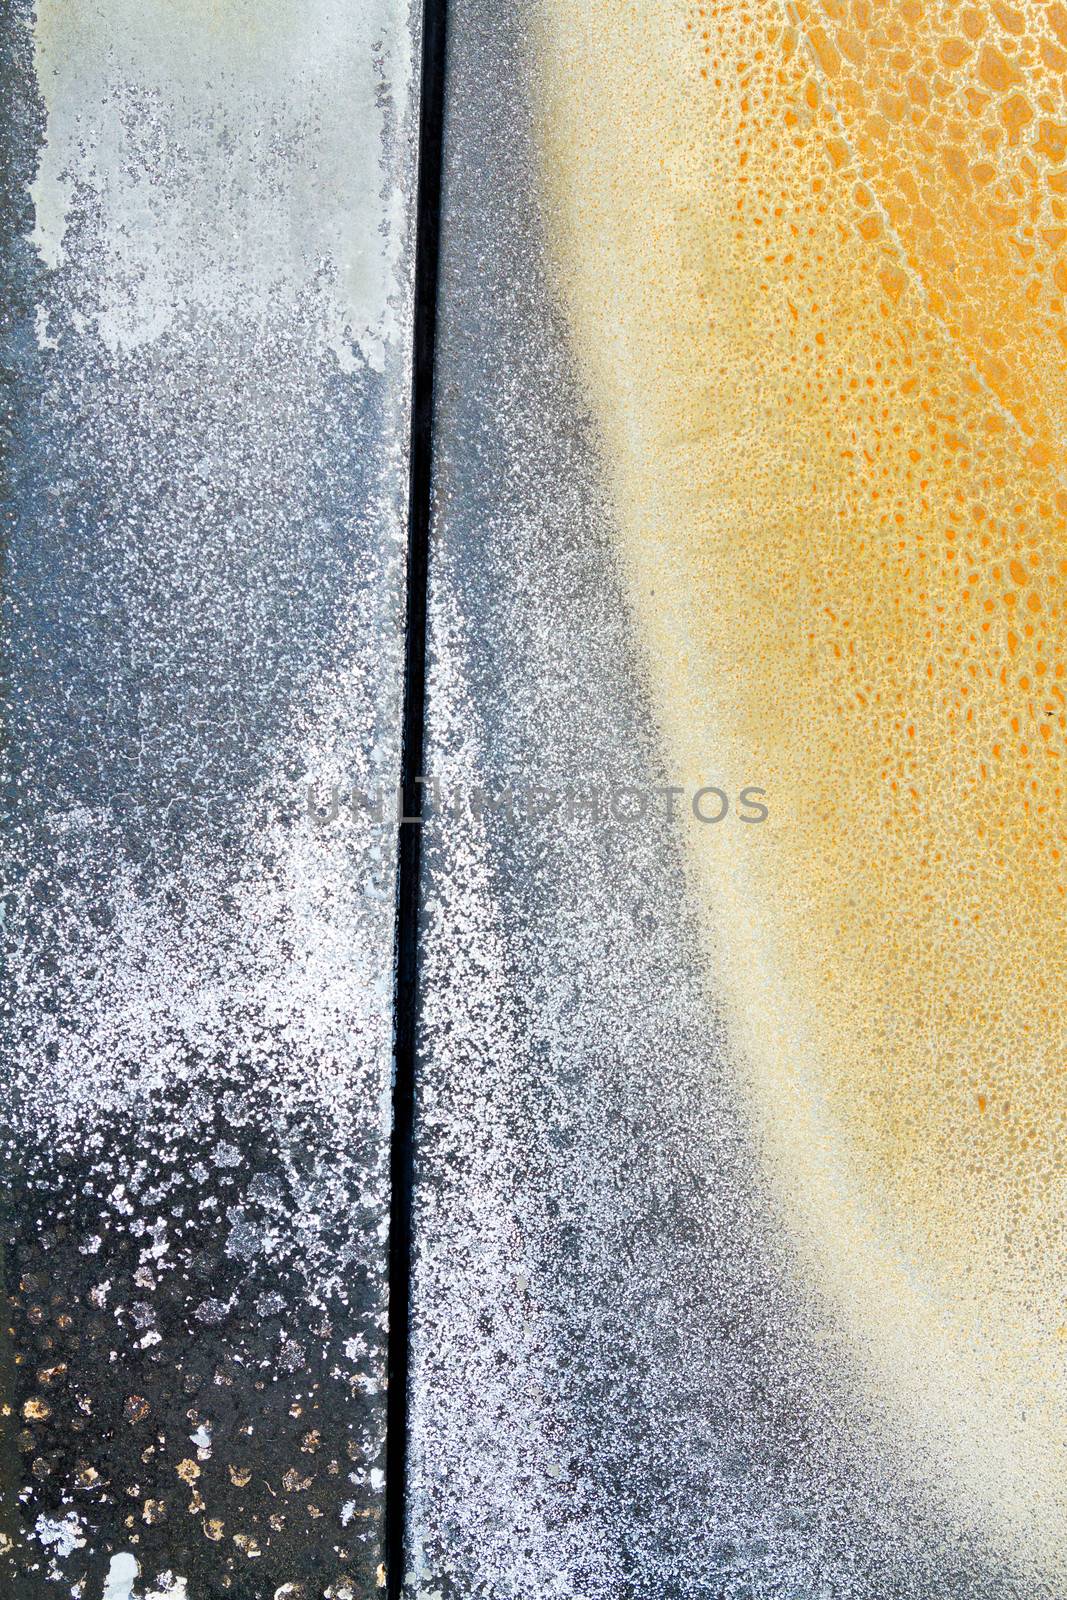 Abstract background color image of pieces at a junkyard auto salvage yard.